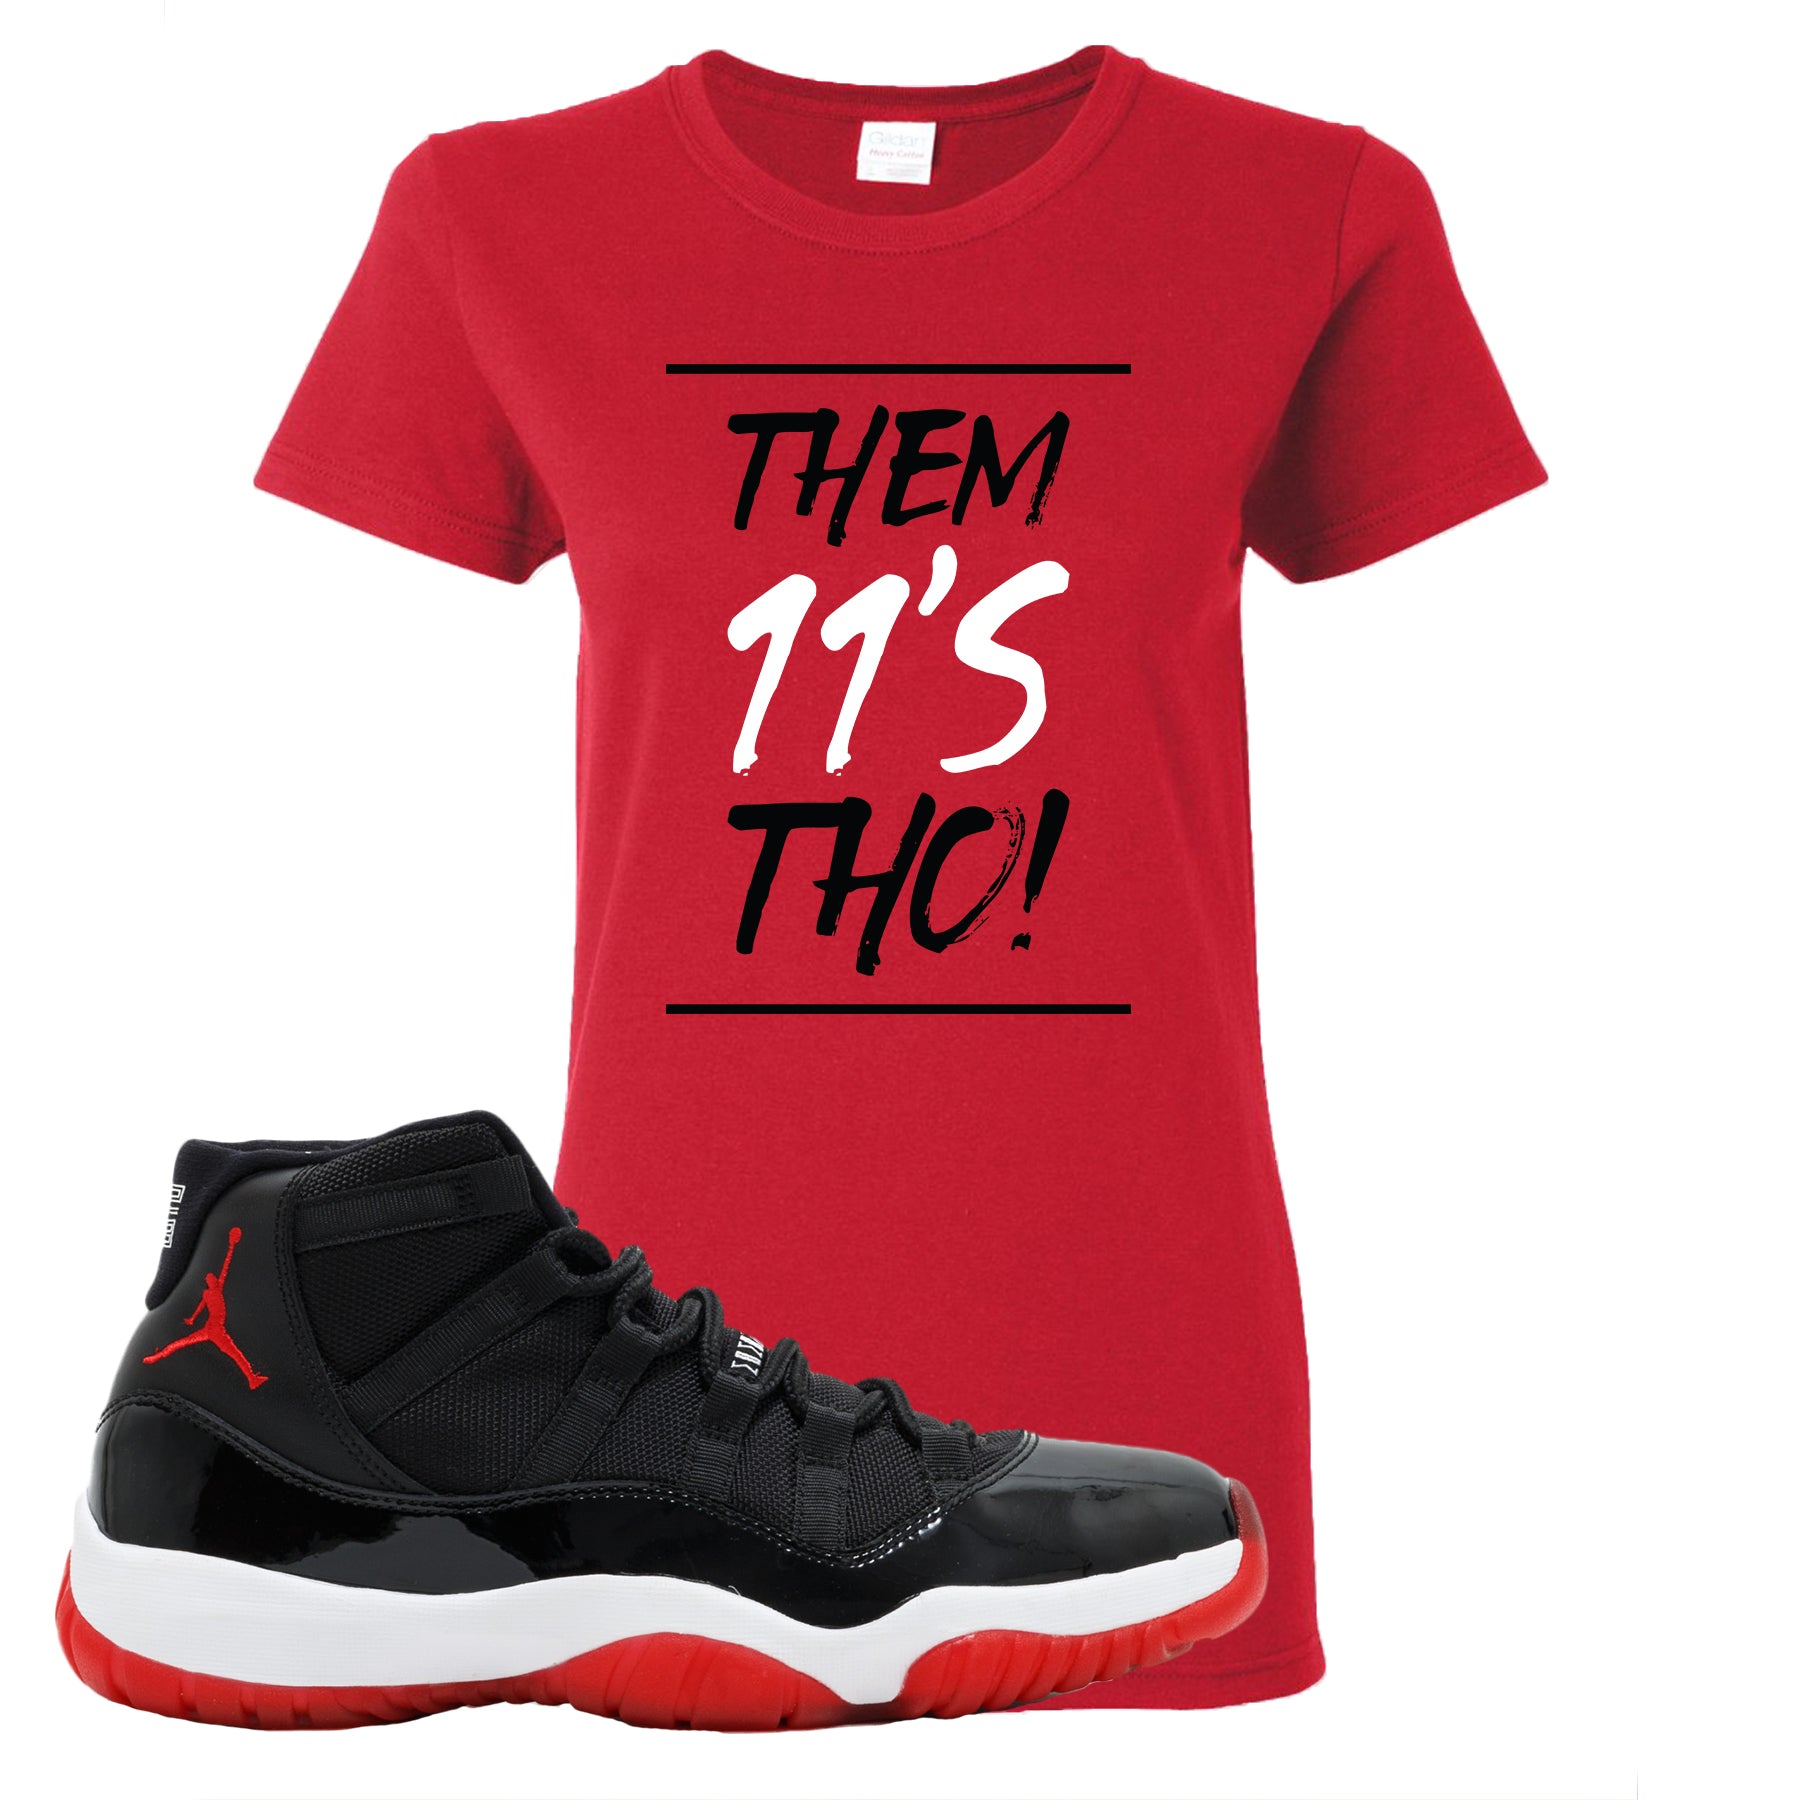 high top red 11s